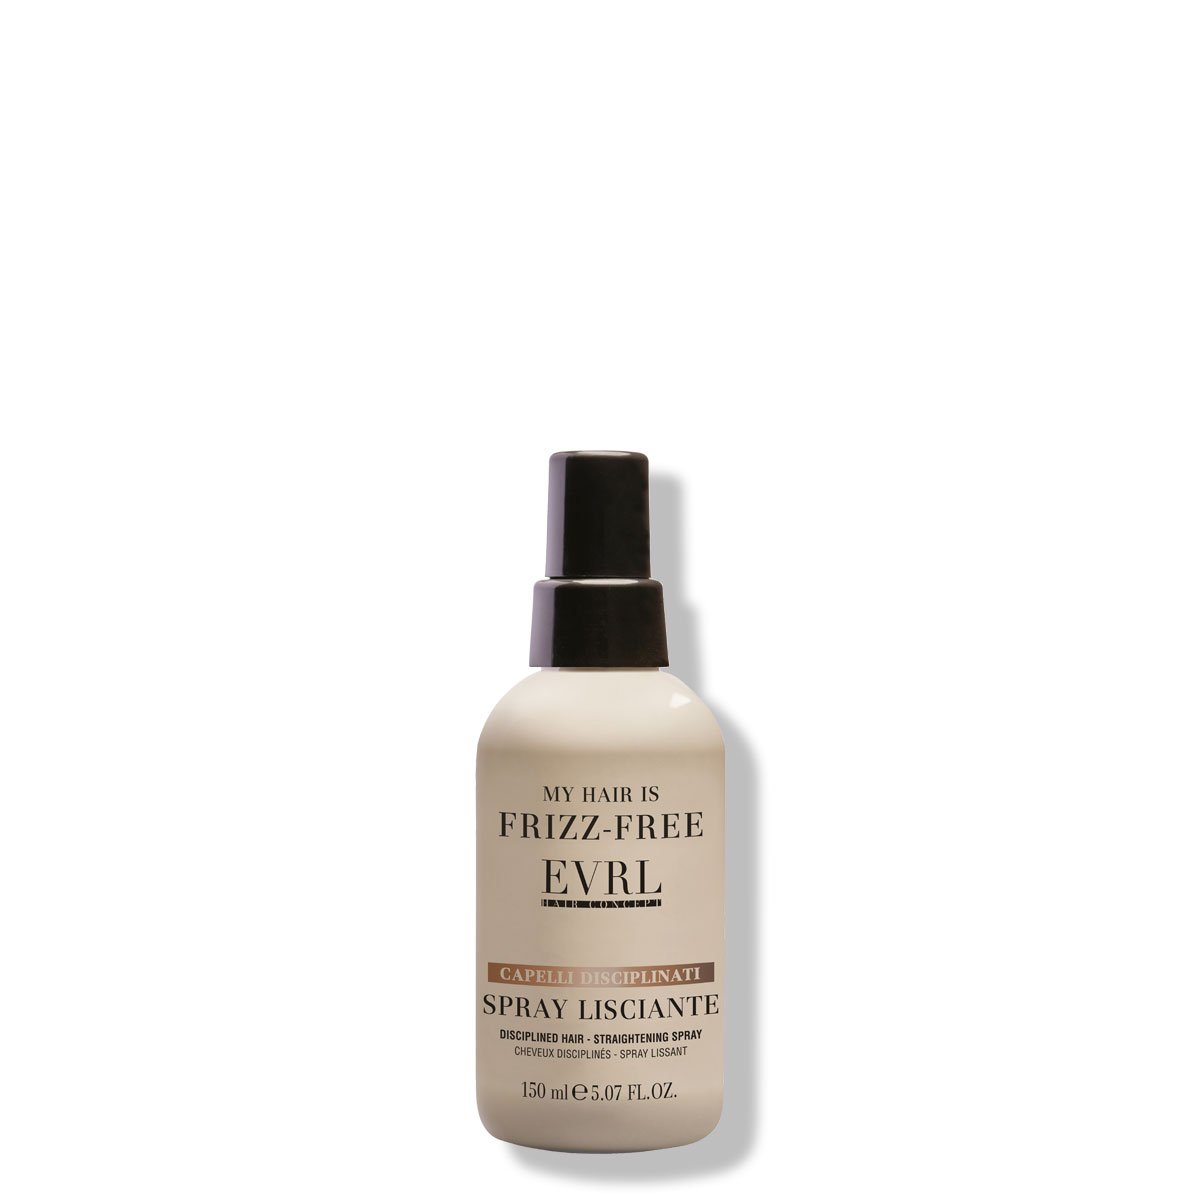 SMOOTH AND DISCIPLINED HAIR - SMOOTHING SPRAY 150 ml